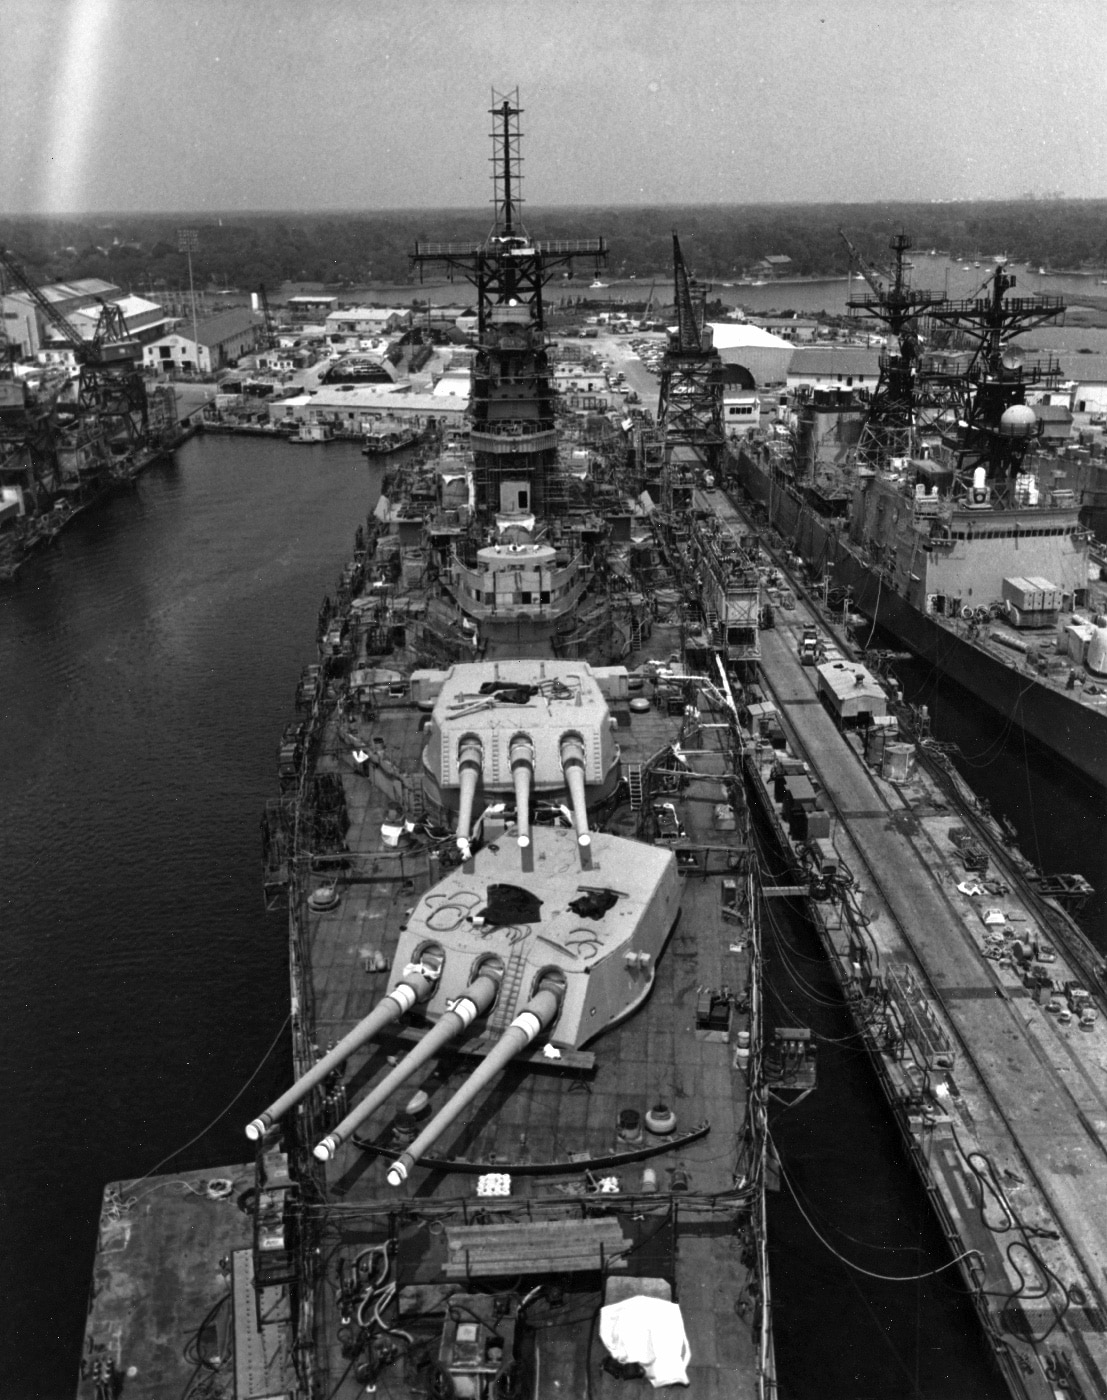 USS Iowa undergoes conversion and repair Pascagoula Mississippi 1983